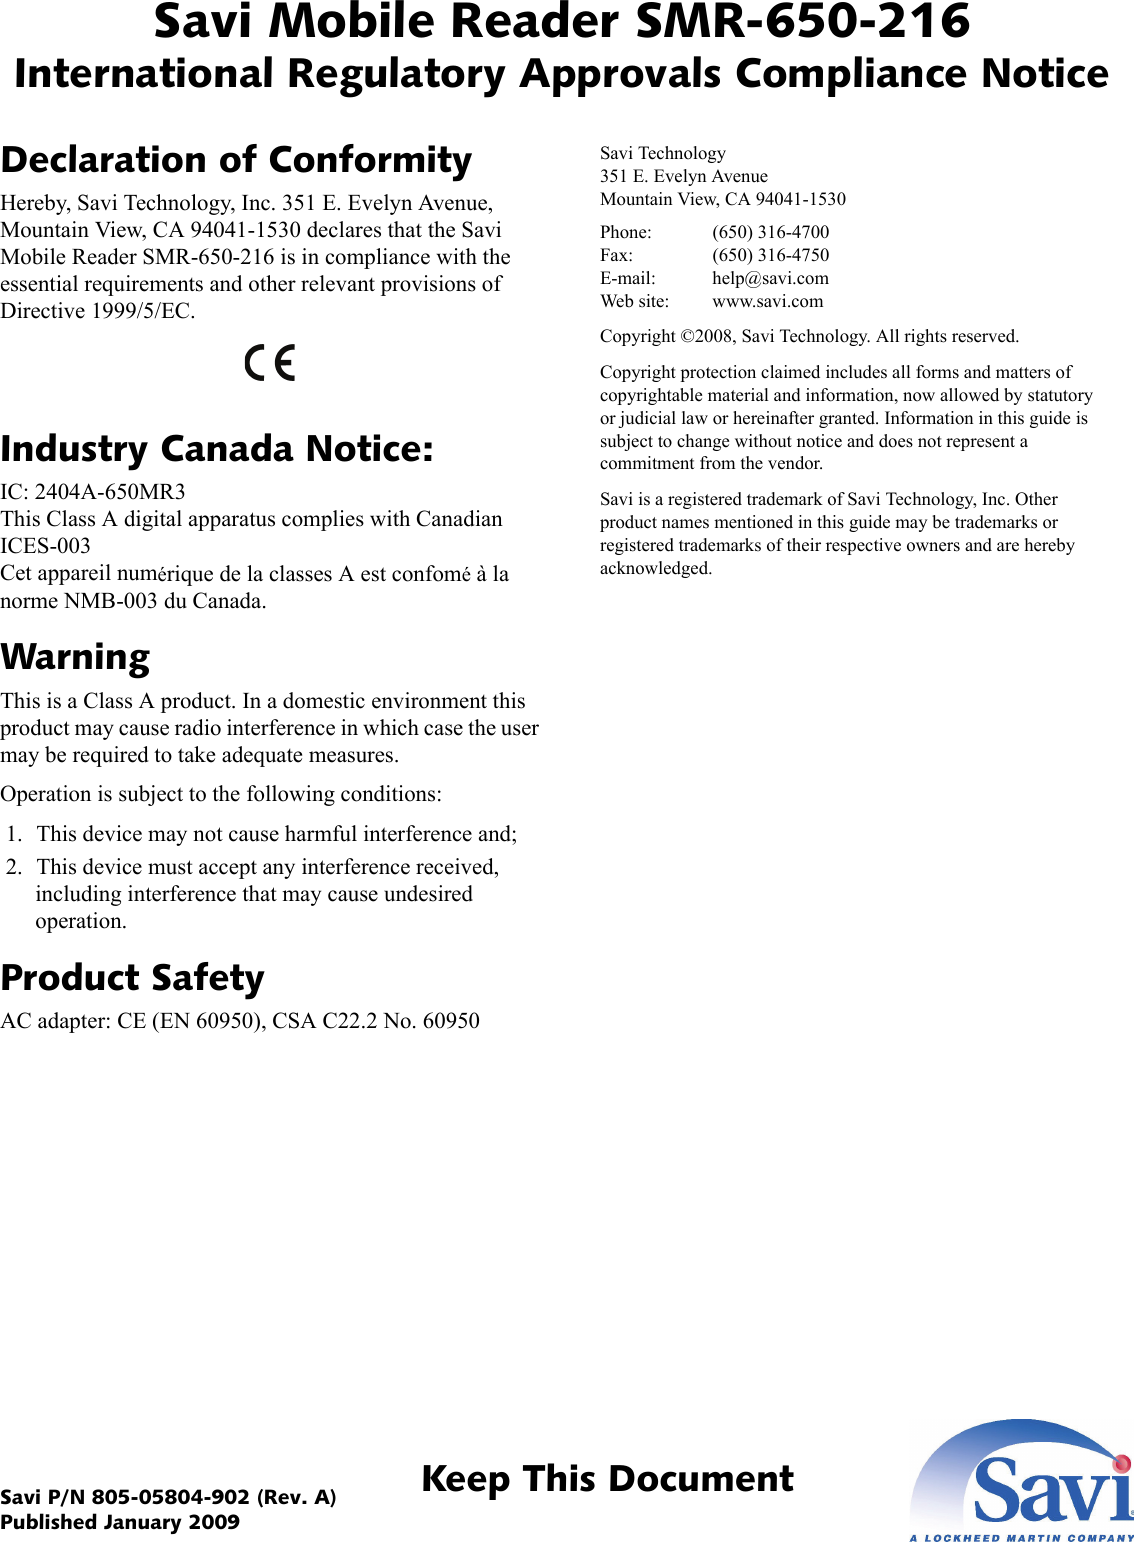 Savi Mobile Reader SMR-650-216International Regulatory Approvals Compliance NoticeKeep This DocumentSavi P/N 805-05804-902 (Rev. A) Published January 2009Declaration of ConformityHereby, Savi Technology, Inc. 351 E. Evelyn Avenue, Mountain View, CA 94041-1530 declares that the Savi Mobile Reader SMR-650-216 is in compliance with the essential requirements and other relevant provisions of Directive 1999/5/EC. Industry Canada Notice:IC: 2404A-650MR3 This Class A digital apparatus complies with Canadian ICES-003 Cet appareil numérique de la classes A est confomé à la norme NMB-003 du Canada.WarningThis is a Class A product. In a domestic environment this product may cause radio interference in which case the user may be required to take adequate measures.Operation is subject to the following conditions: 1. This device may not cause harmful interference and; 2. This device must accept any interference received, including interference that may cause undesired operation.Product SafetyAC adapter: CE (EN 60950), CSA C22.2 No. 60950Savi Technology 351 E. Evelyn Avenue Mountain View, CA 94041-1530Phone: (650) 316-4700 Fax: (650) 316-4750 E-mail: help@savi.com Web site: www.savi.comCopyright ©2008, Savi Technology. All rights reserved.Copyright protection claimed includes all forms and matters of copyrightable material and information, now allowed by statutory or judicial law or hereinafter granted. Information in this guide is subject to change without notice and does not represent a commitment from the vendor.Savi is a registered trademark of Savi Technology, Inc. Other product names mentioned in this guide may be trademarks or registered trademarks of their respective owners and are hereby acknowledged.